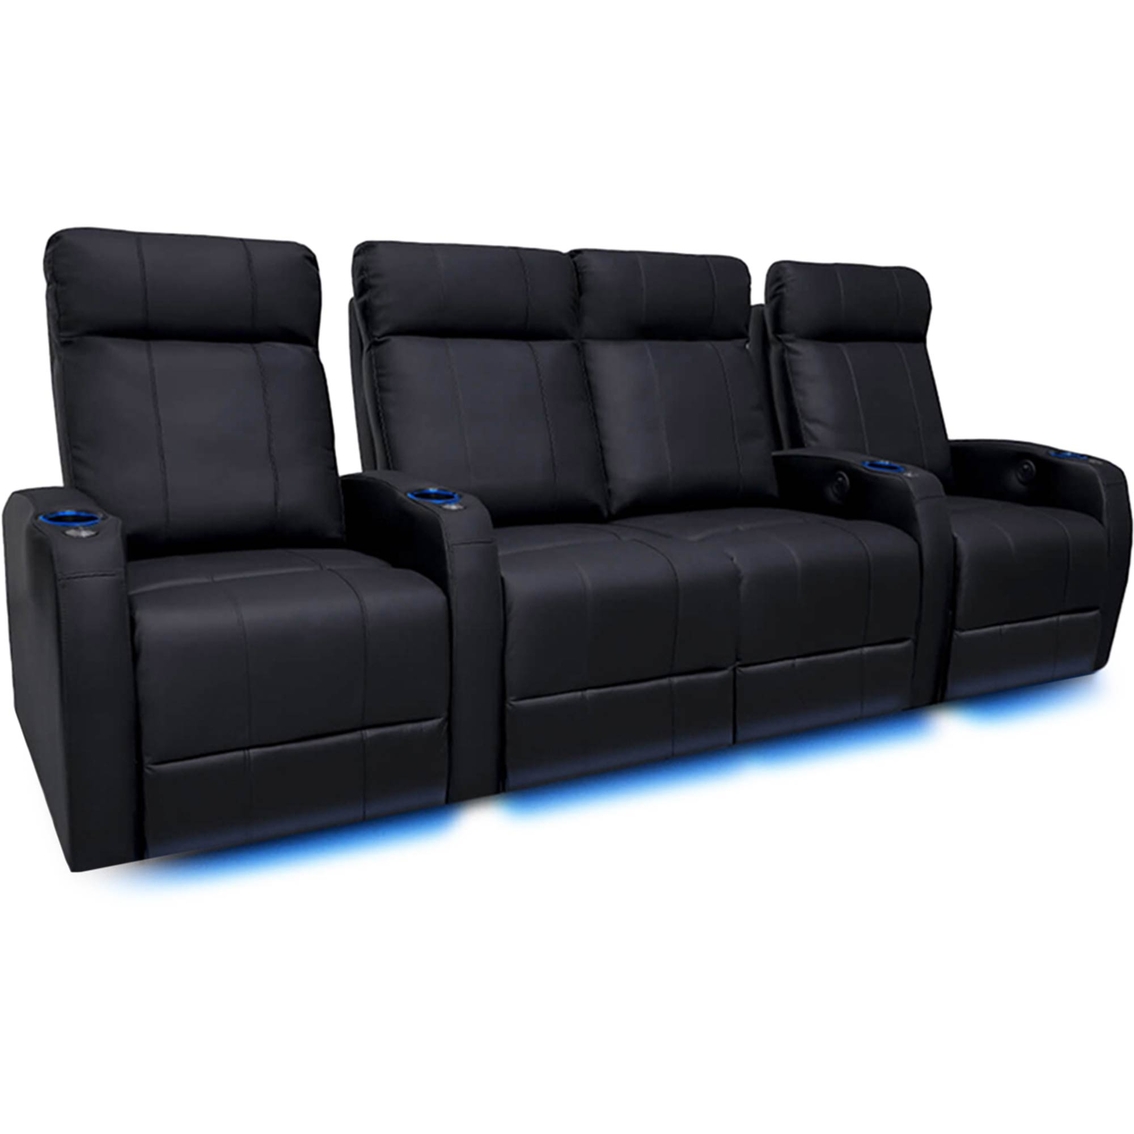 Valencia Syracuse Top Grain Leather Home Theater Seating For 4 | Chairs ...